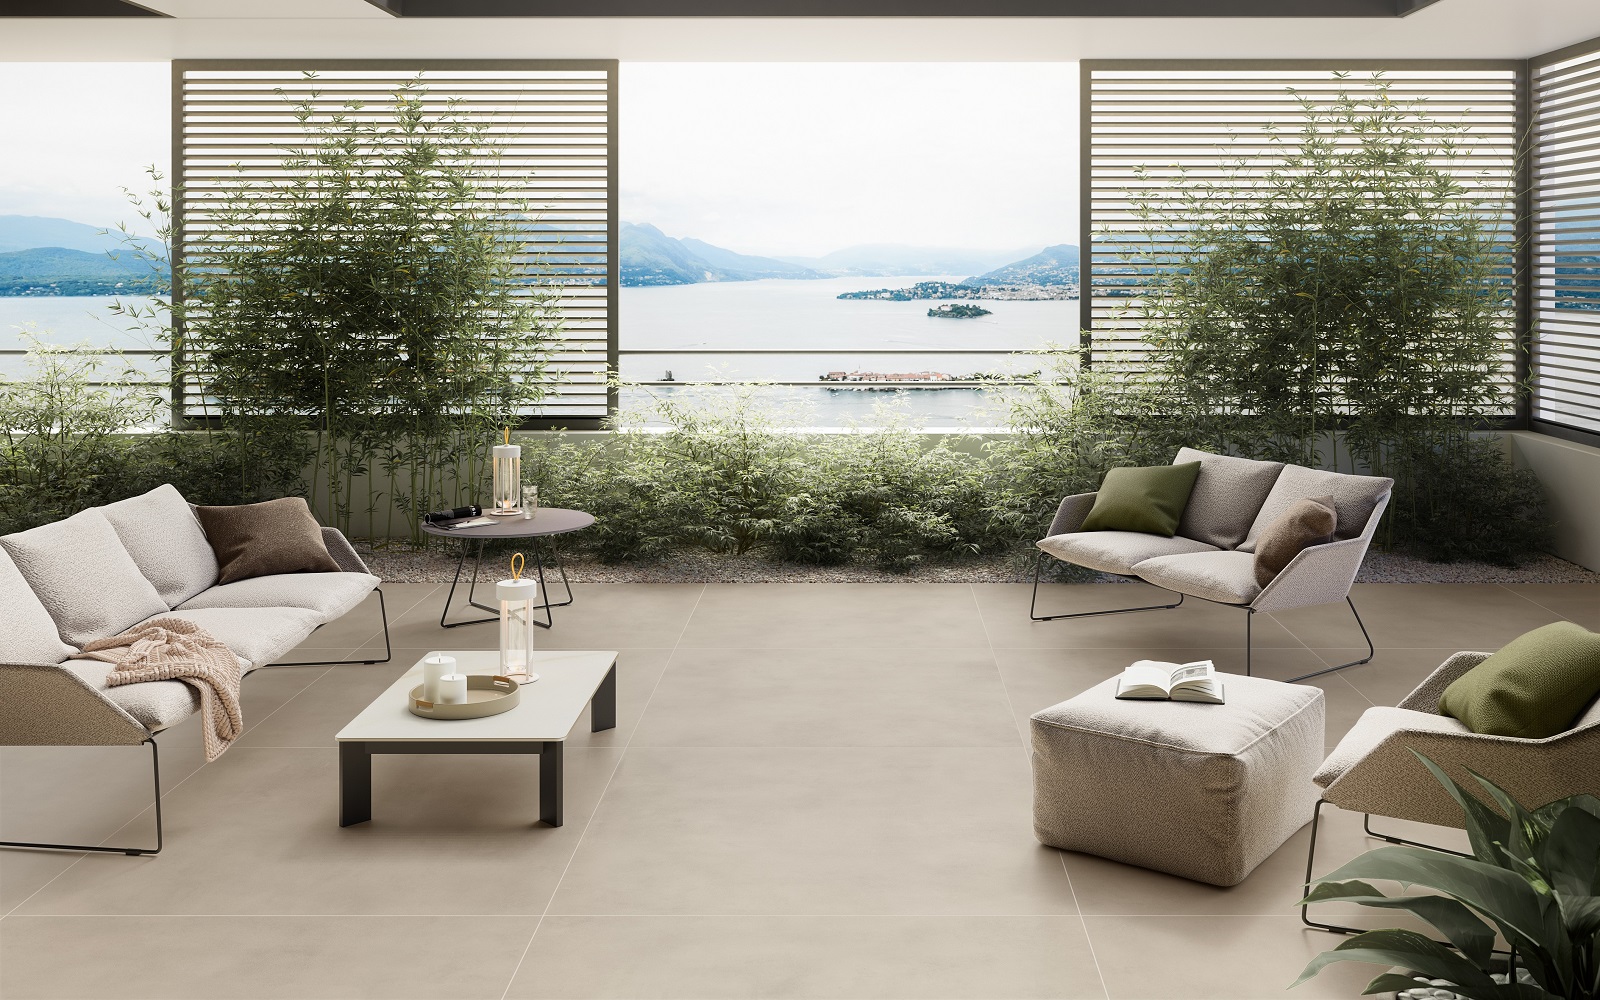 tiled outdoor floor with view across bay and islands